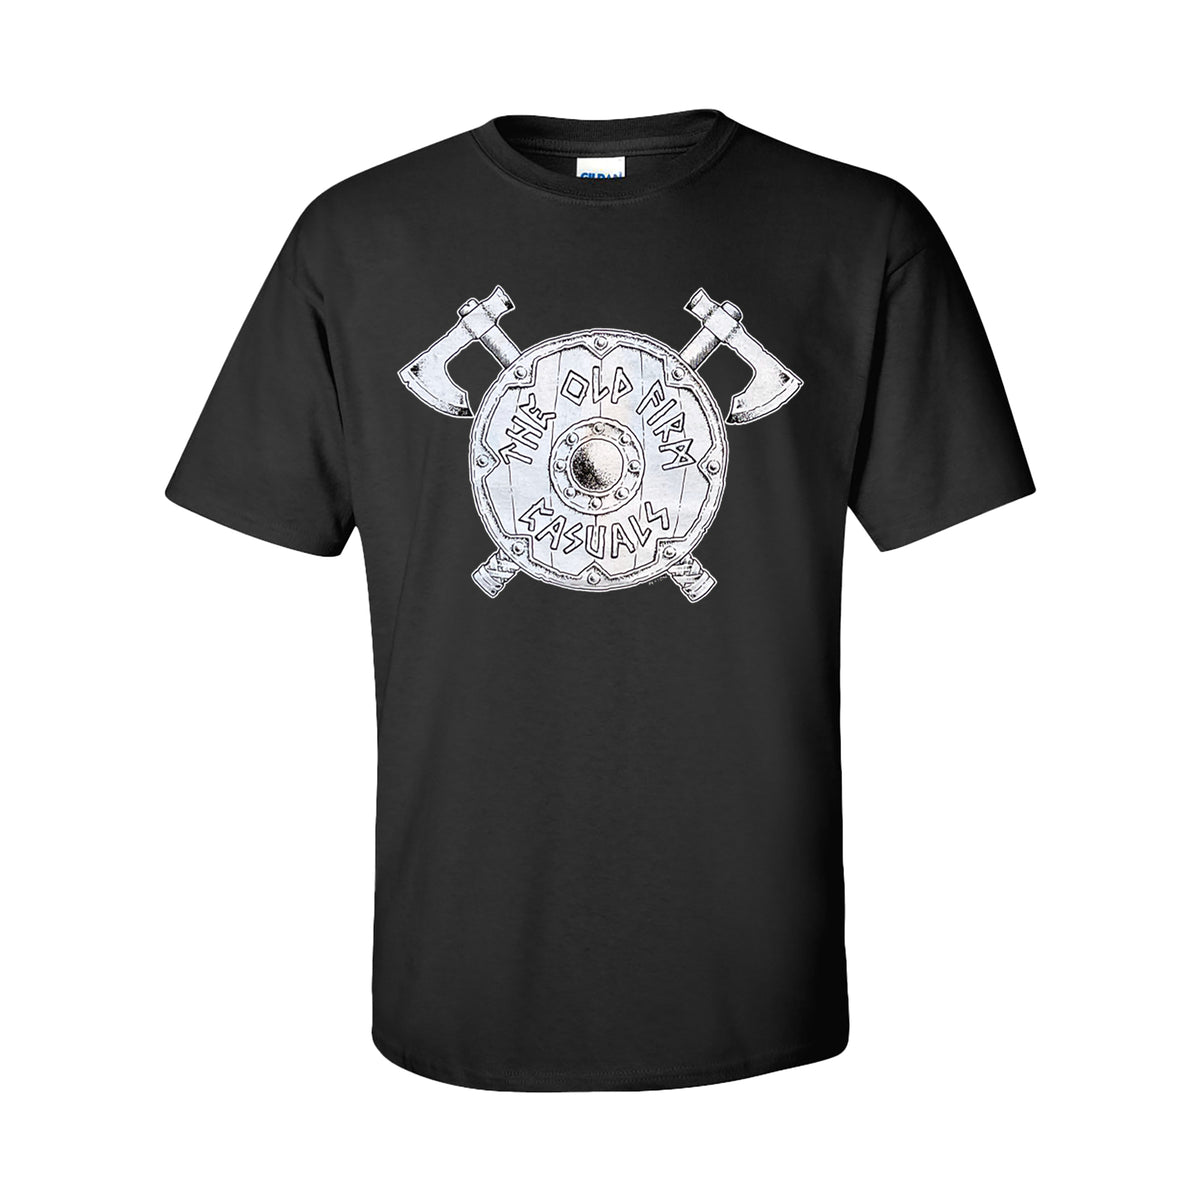 The Old Firm Casuals - Shield - Black - T-Shirt